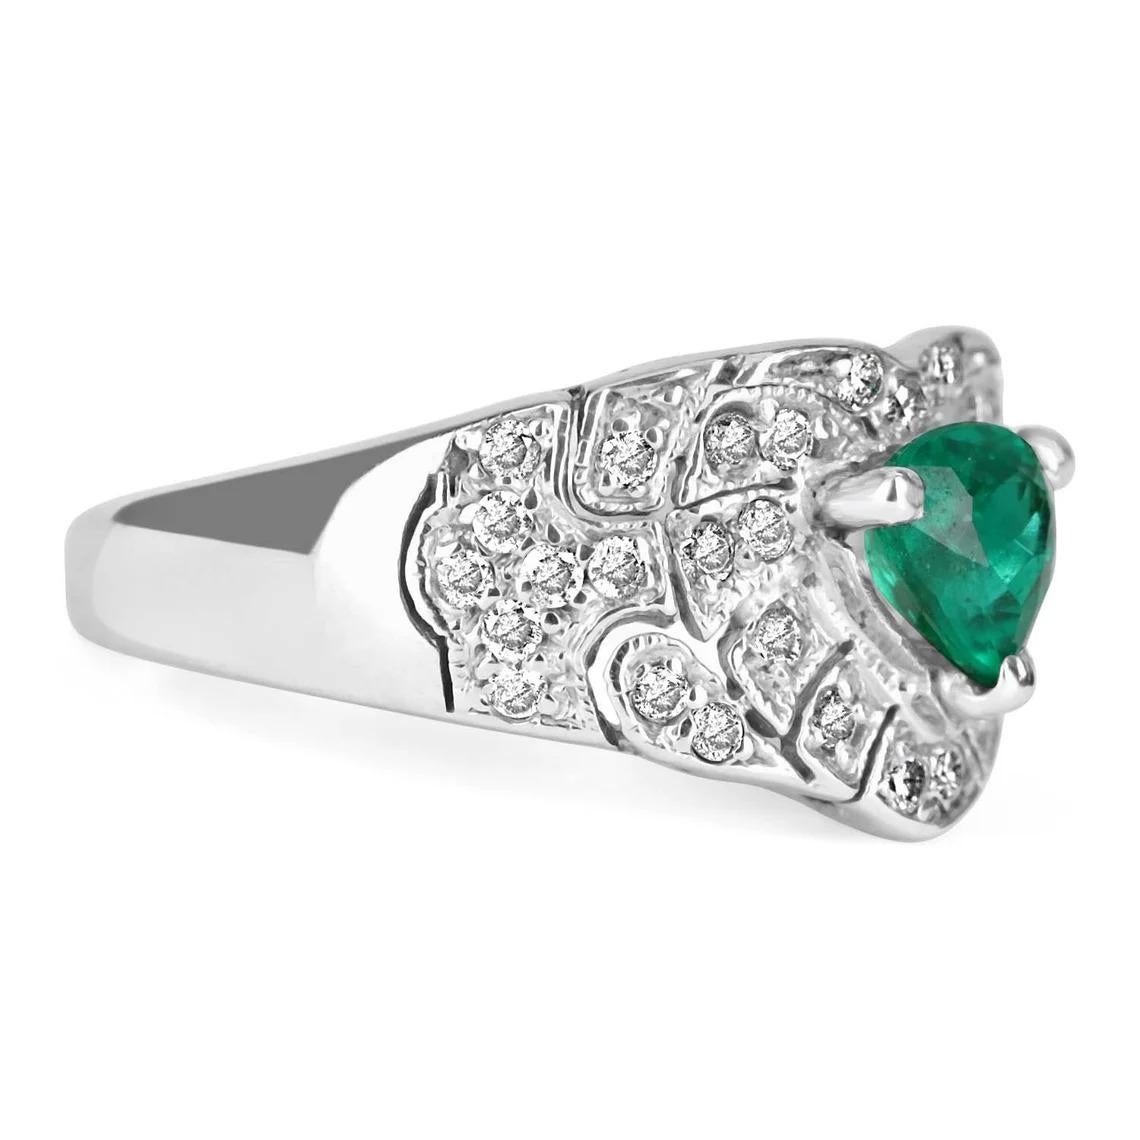 A one of a kind, emerald and diamond statement ring. The center stone features a stunning AAA+ quality trilliant cut Colombian emerald. Showcasing a vivacious, desirable green color with excellent luster. Surrounding this gorgeous stone there are